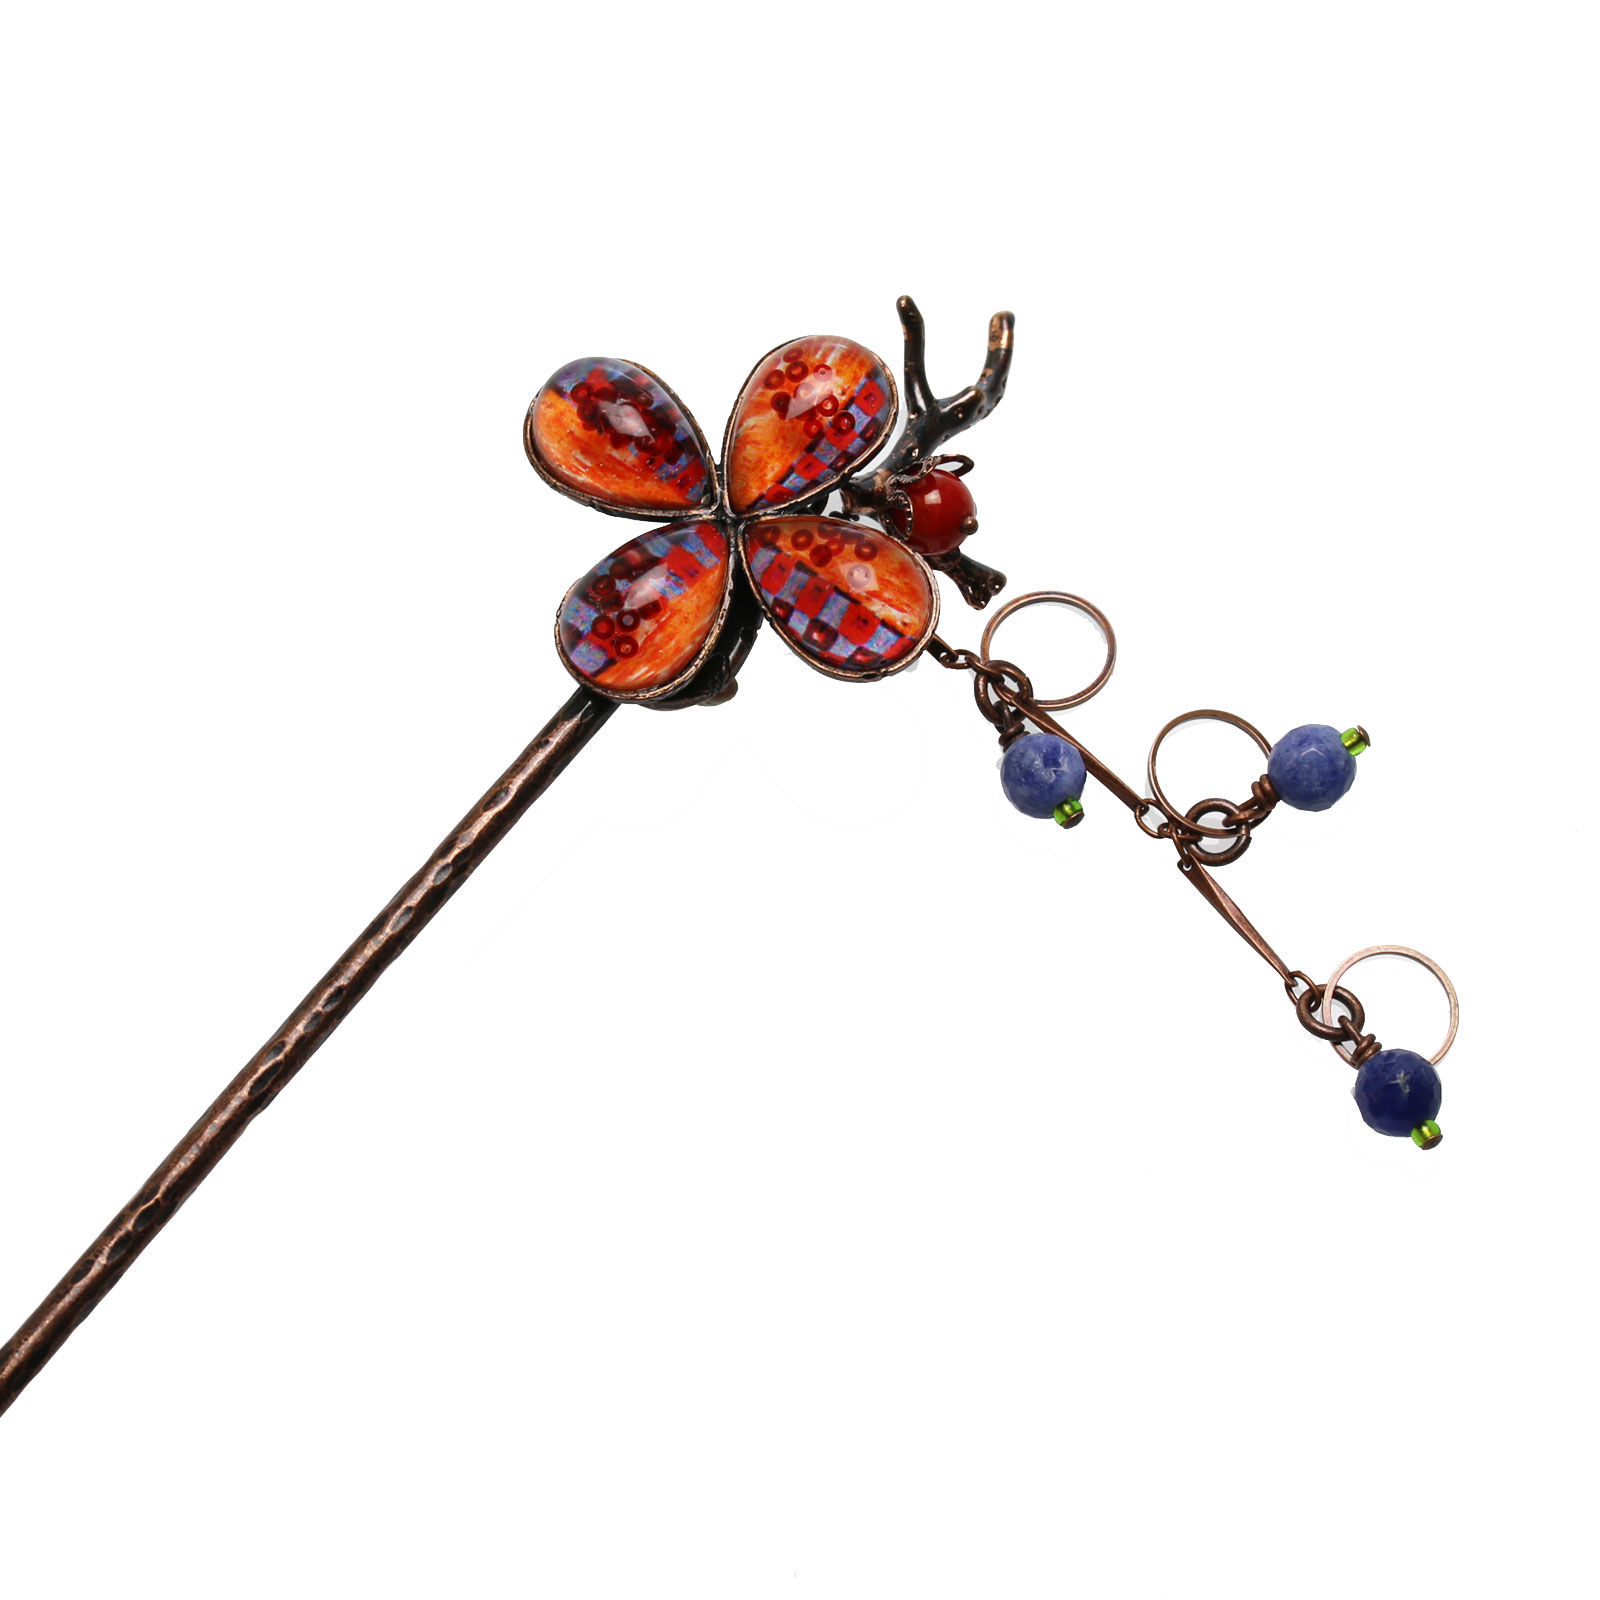 hairpin-with-dangling-ornaments